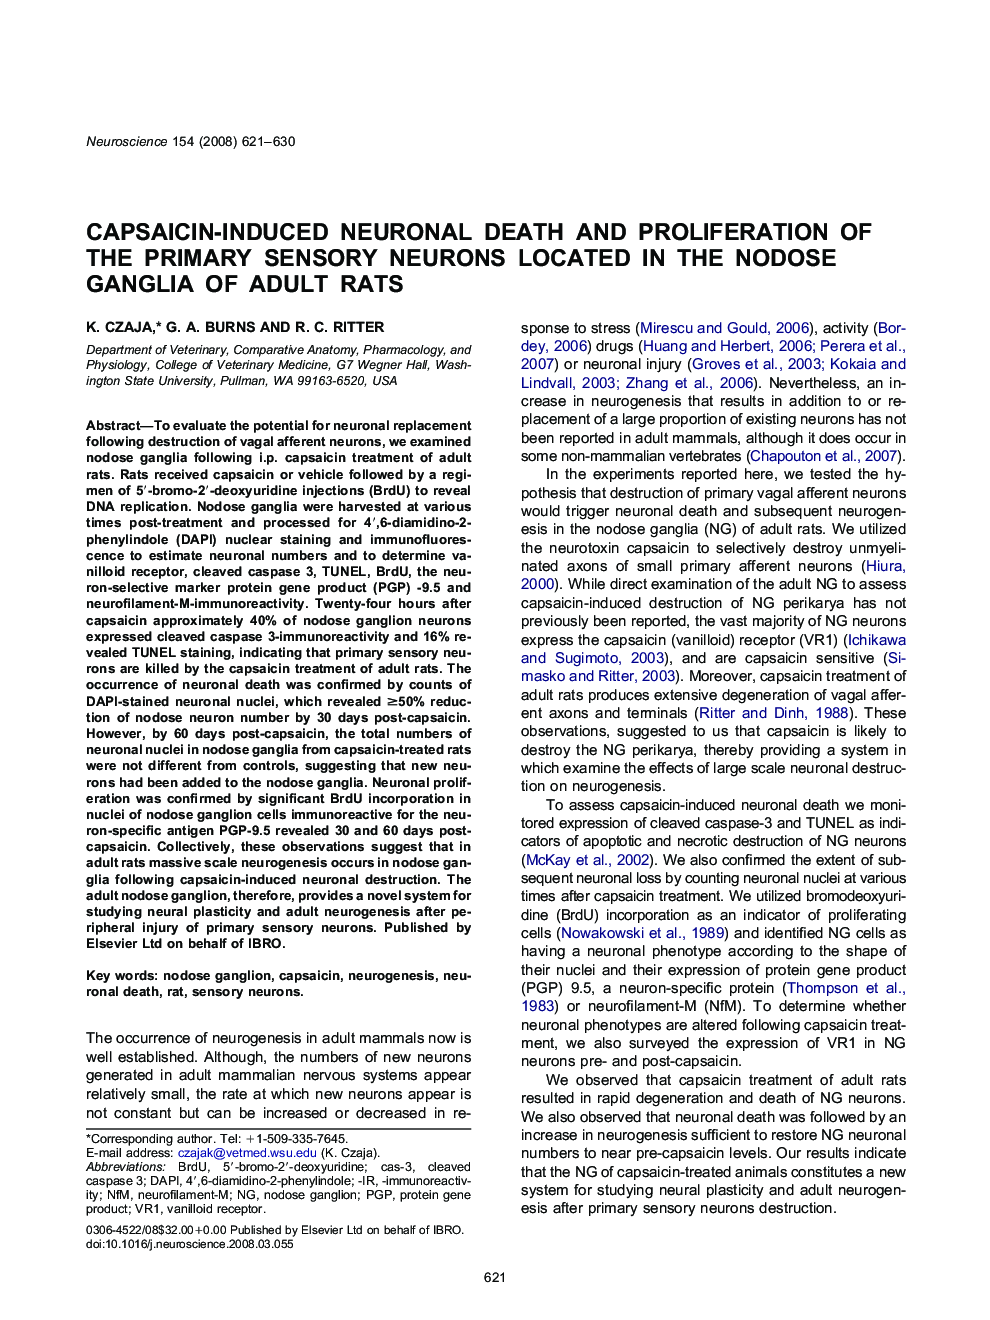 Capsaicin-induced neuronal death and proliferation of the primary sensory neurons located in the nodose ganglia of adult rats